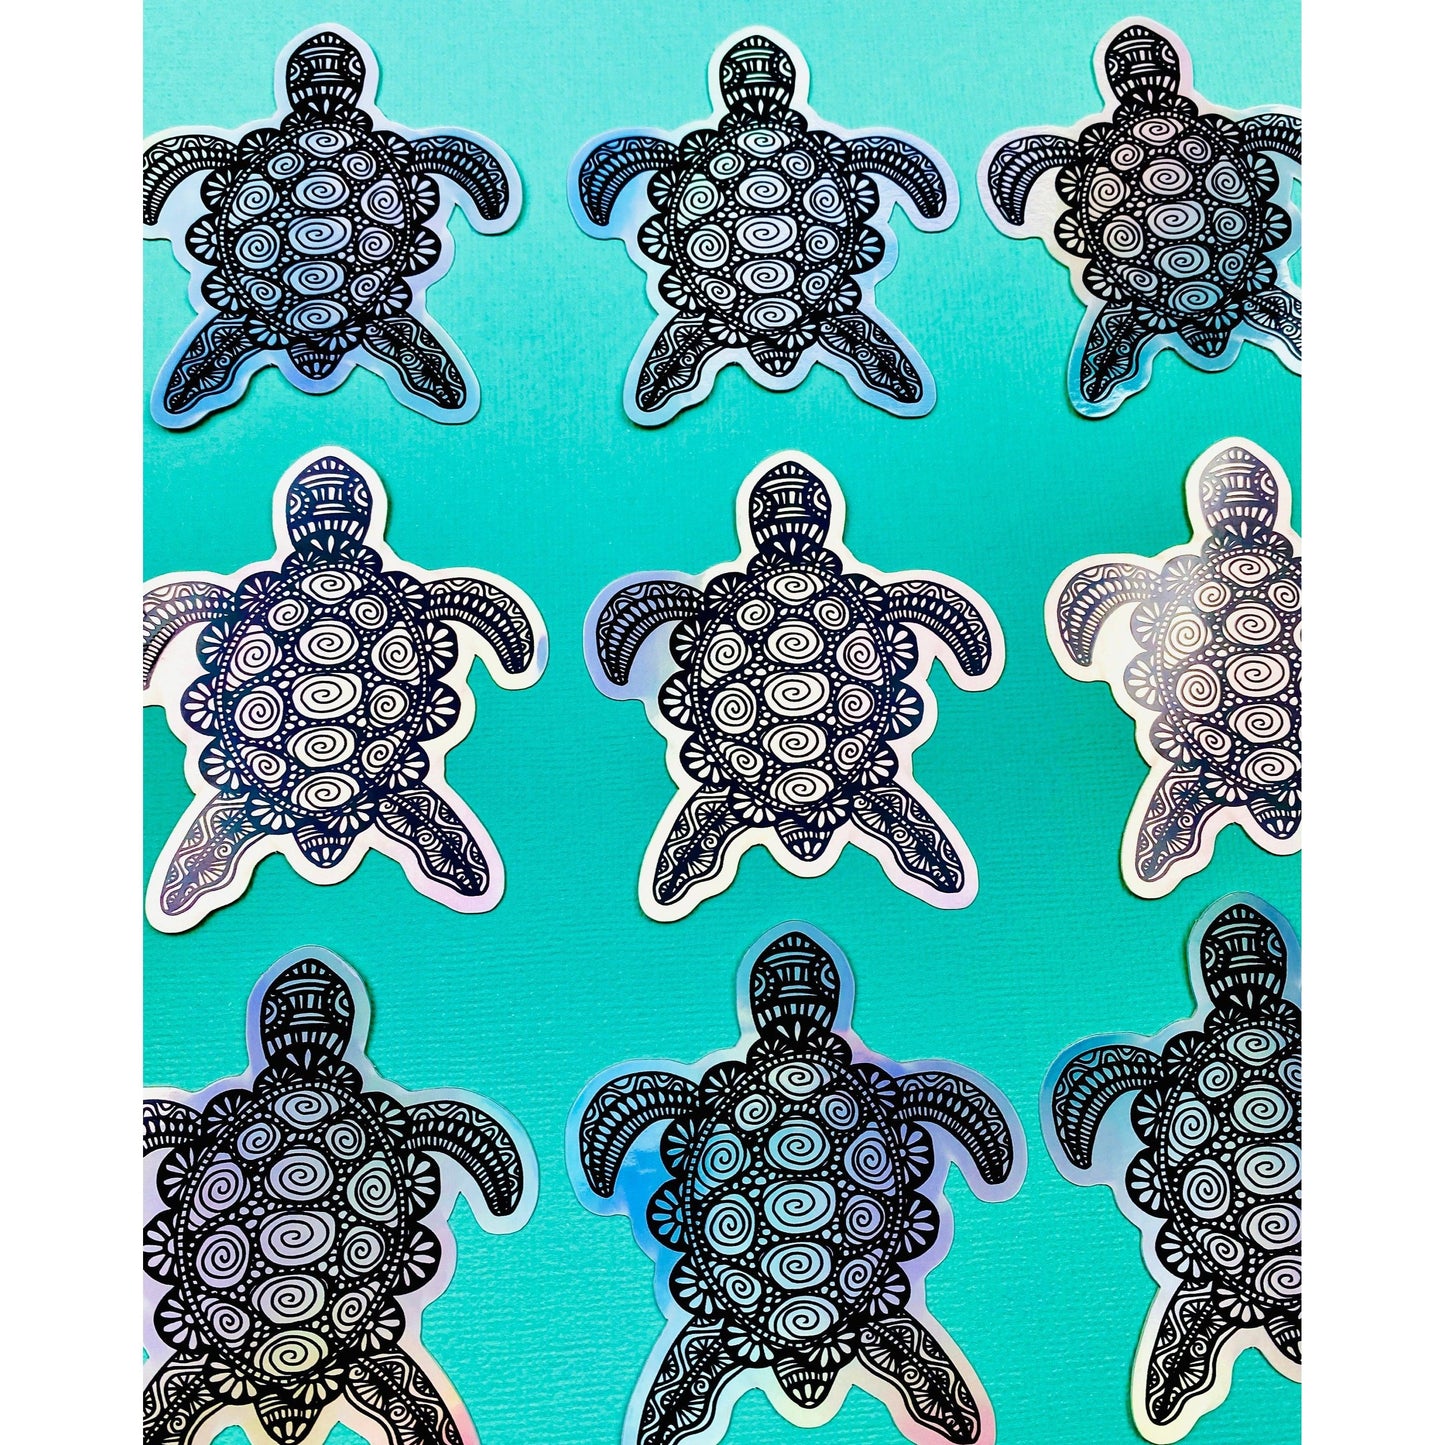 Boho Sea Turtle Holographic Sticker With Intricate Bohemian Design - Ottos Grotto :: Stickers For Your Stuff